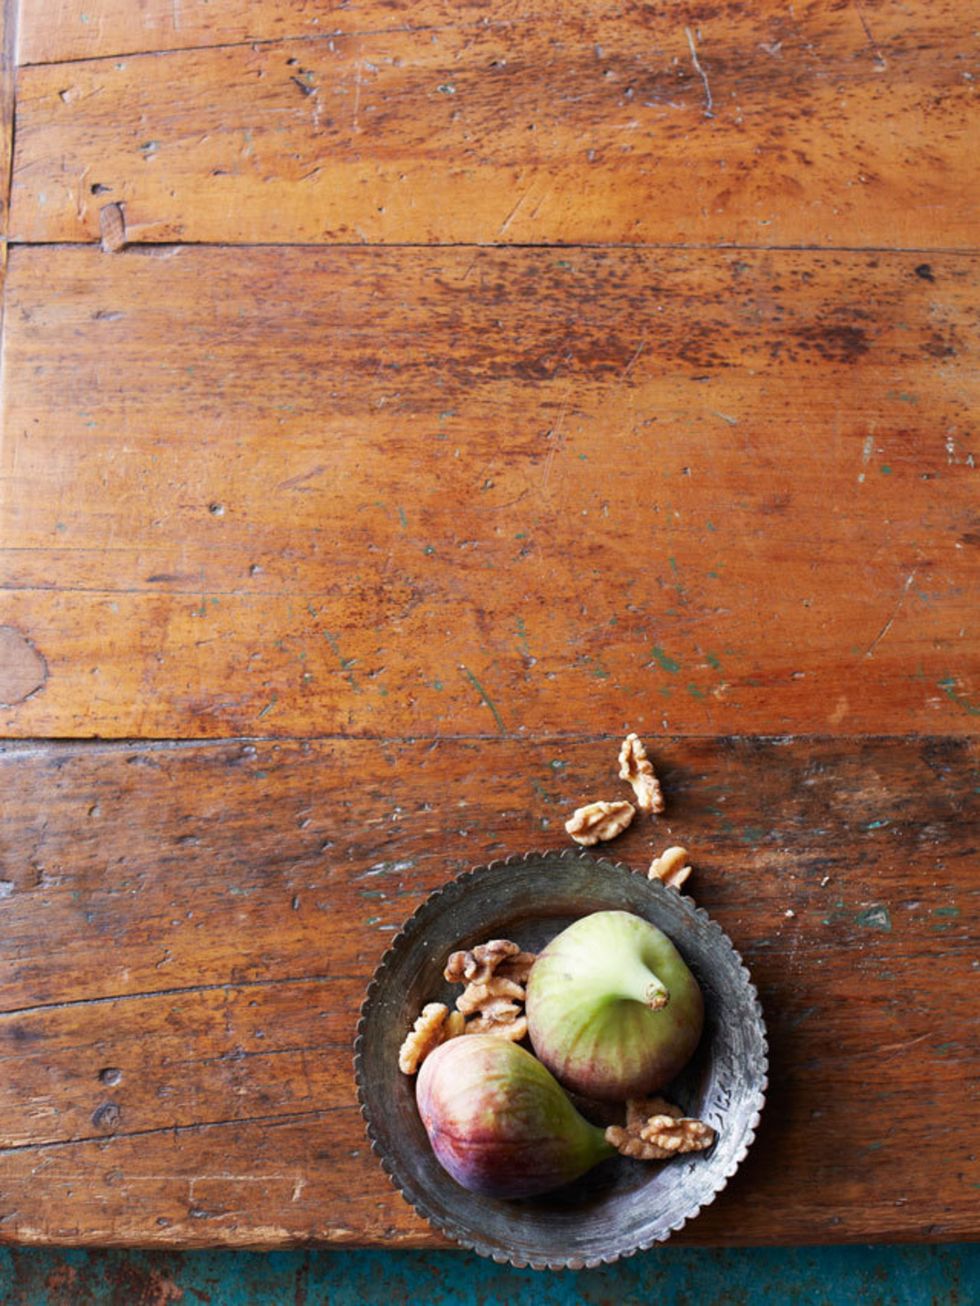 Wood, Produce, Coconut, Ingredient, Fruit, Whole food, Natural foods, Vegan nutrition, Wood stain, Still life photography, 